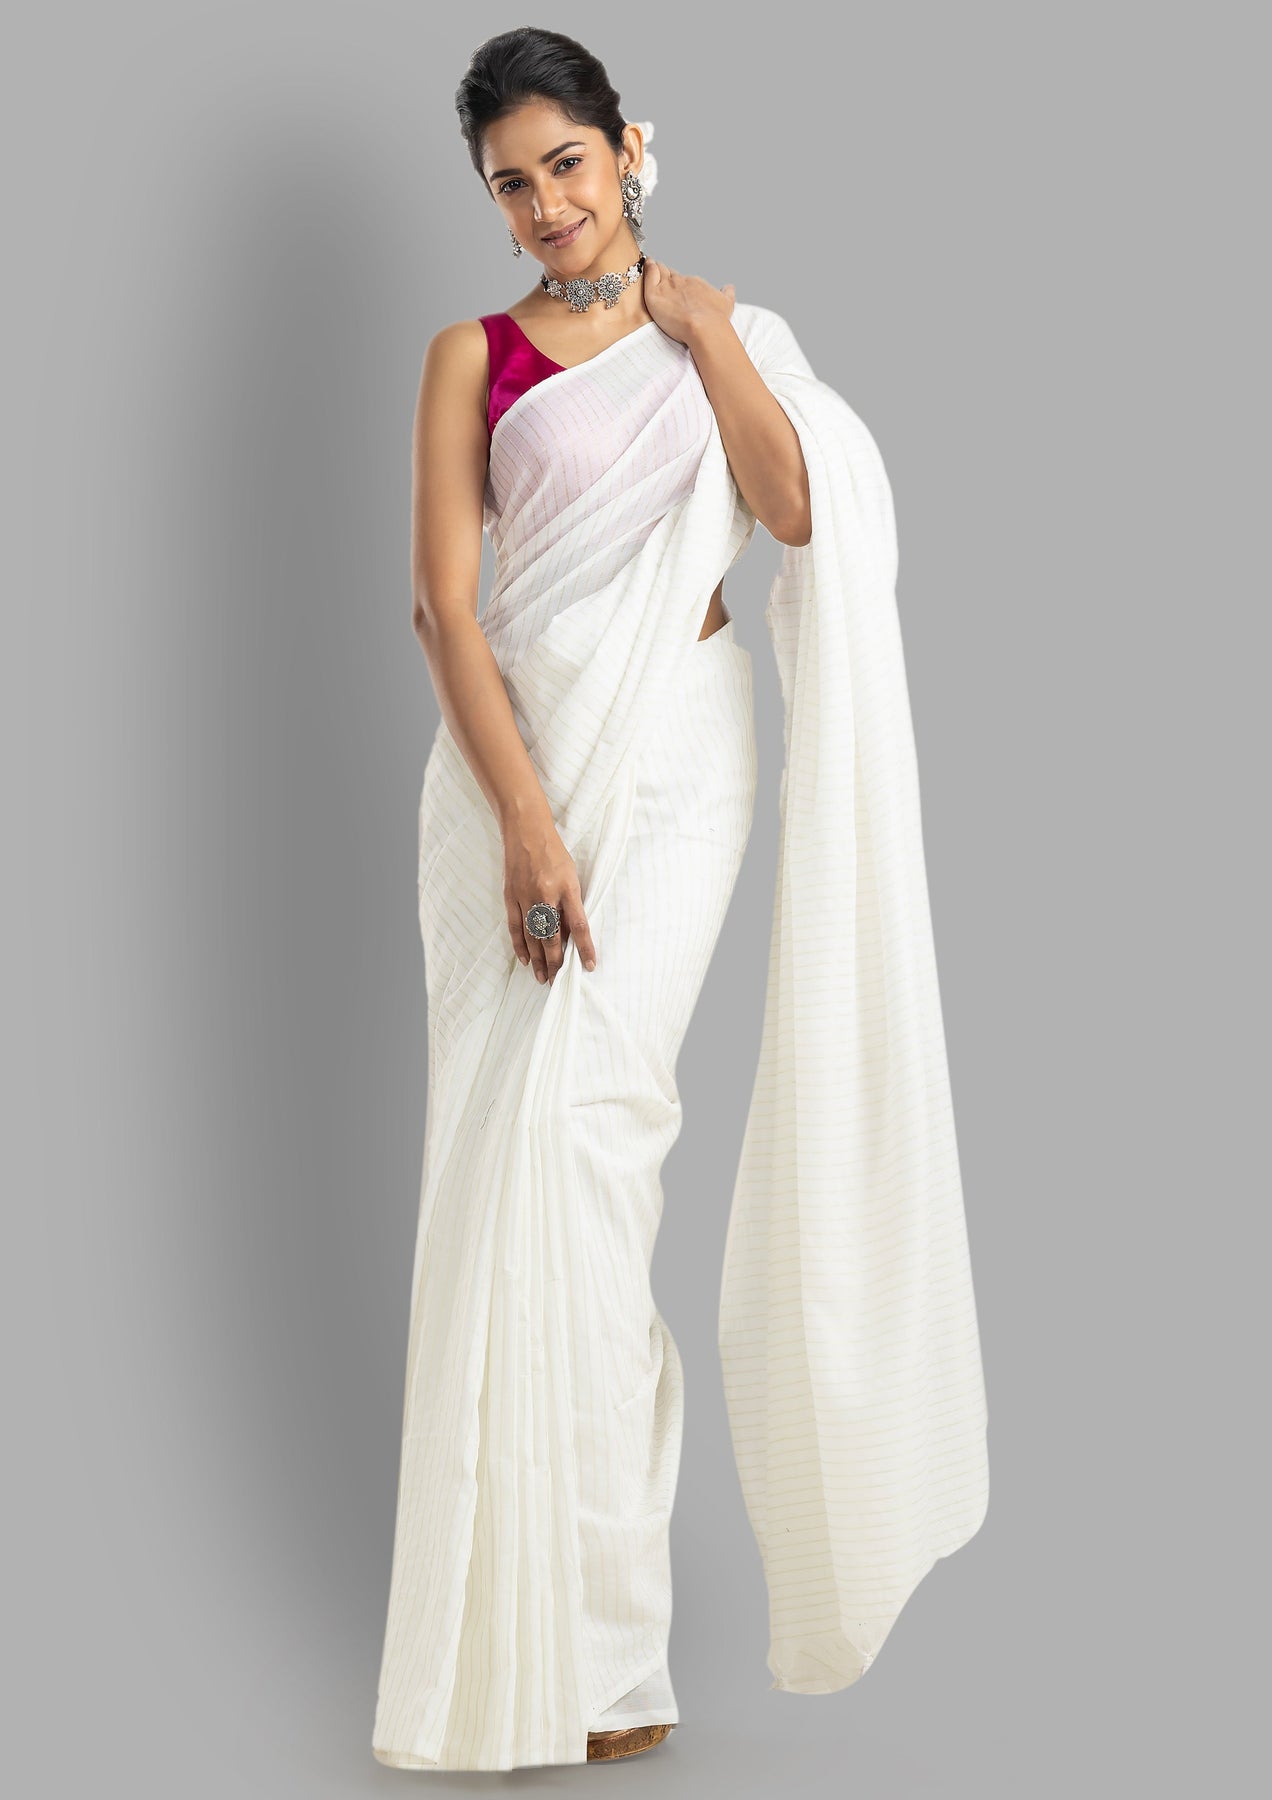 Buy all about you Sarees online - Women - 542 products | FASHIOLA.in